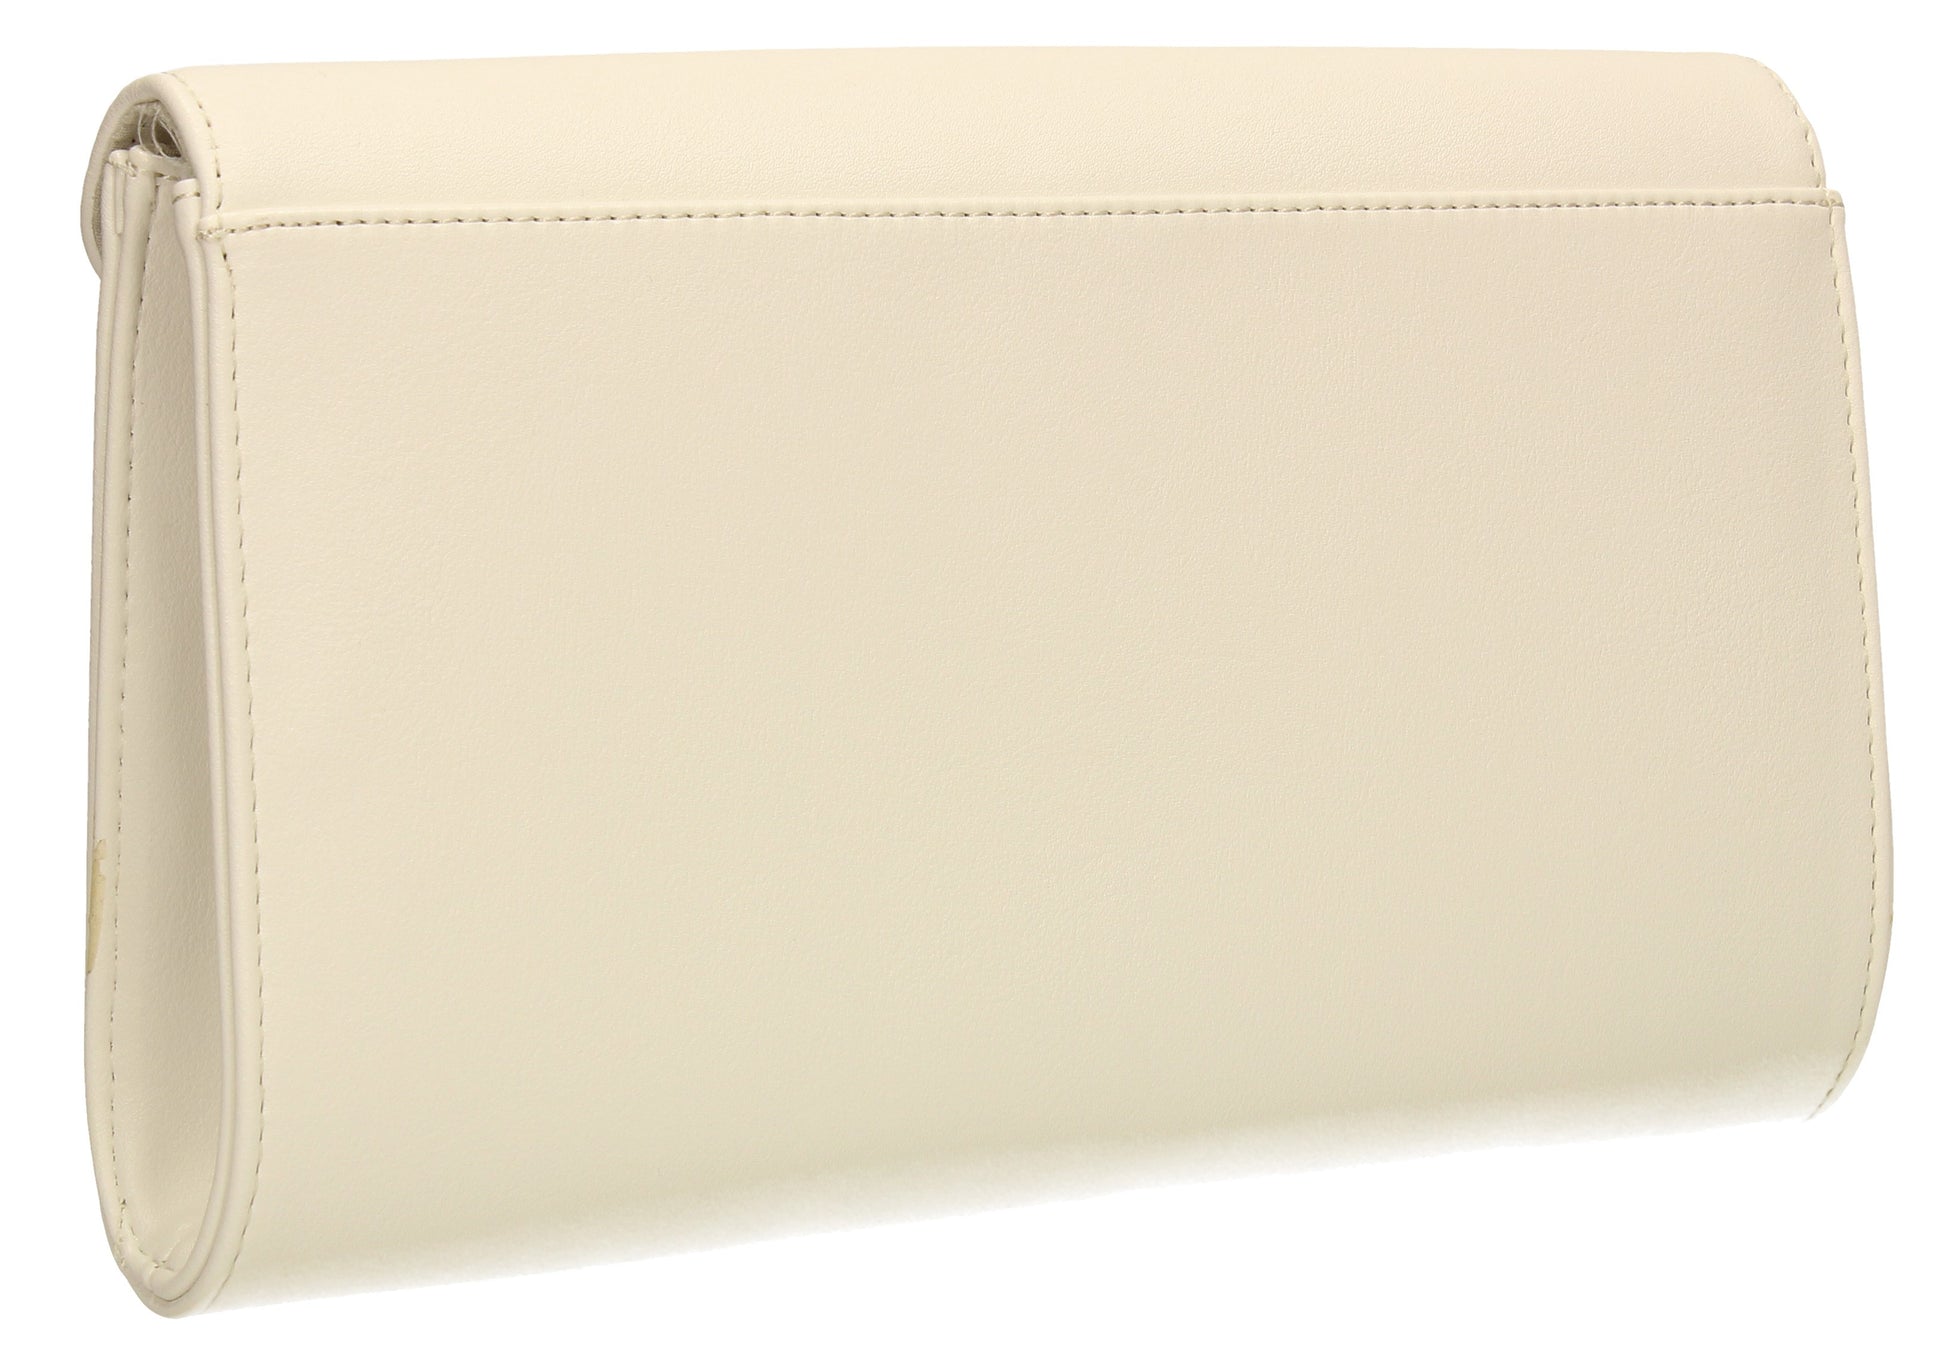 SWANKYSWANS Seraphina Clutch Bag White Cute Cheap Clutch Bag For Weddings School and Work